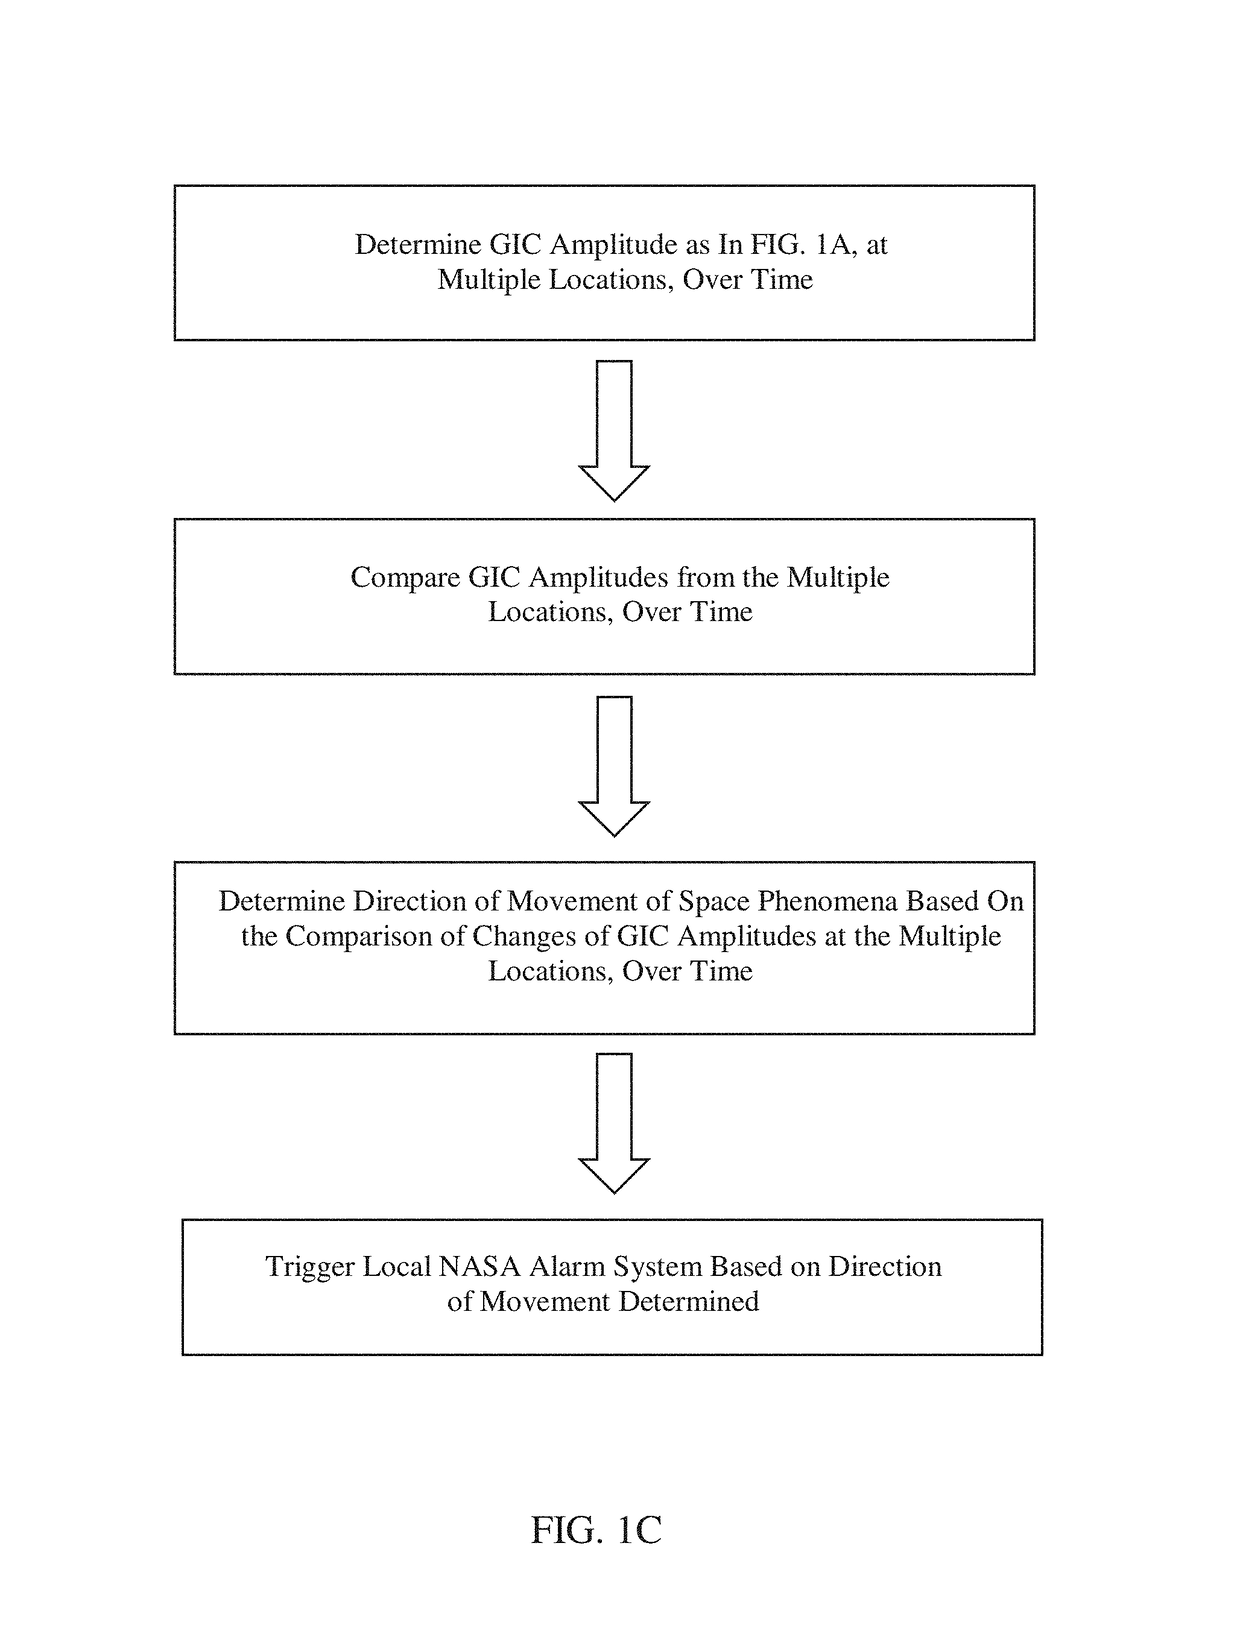 Method of using power grid as large antenna for geophysical imaging